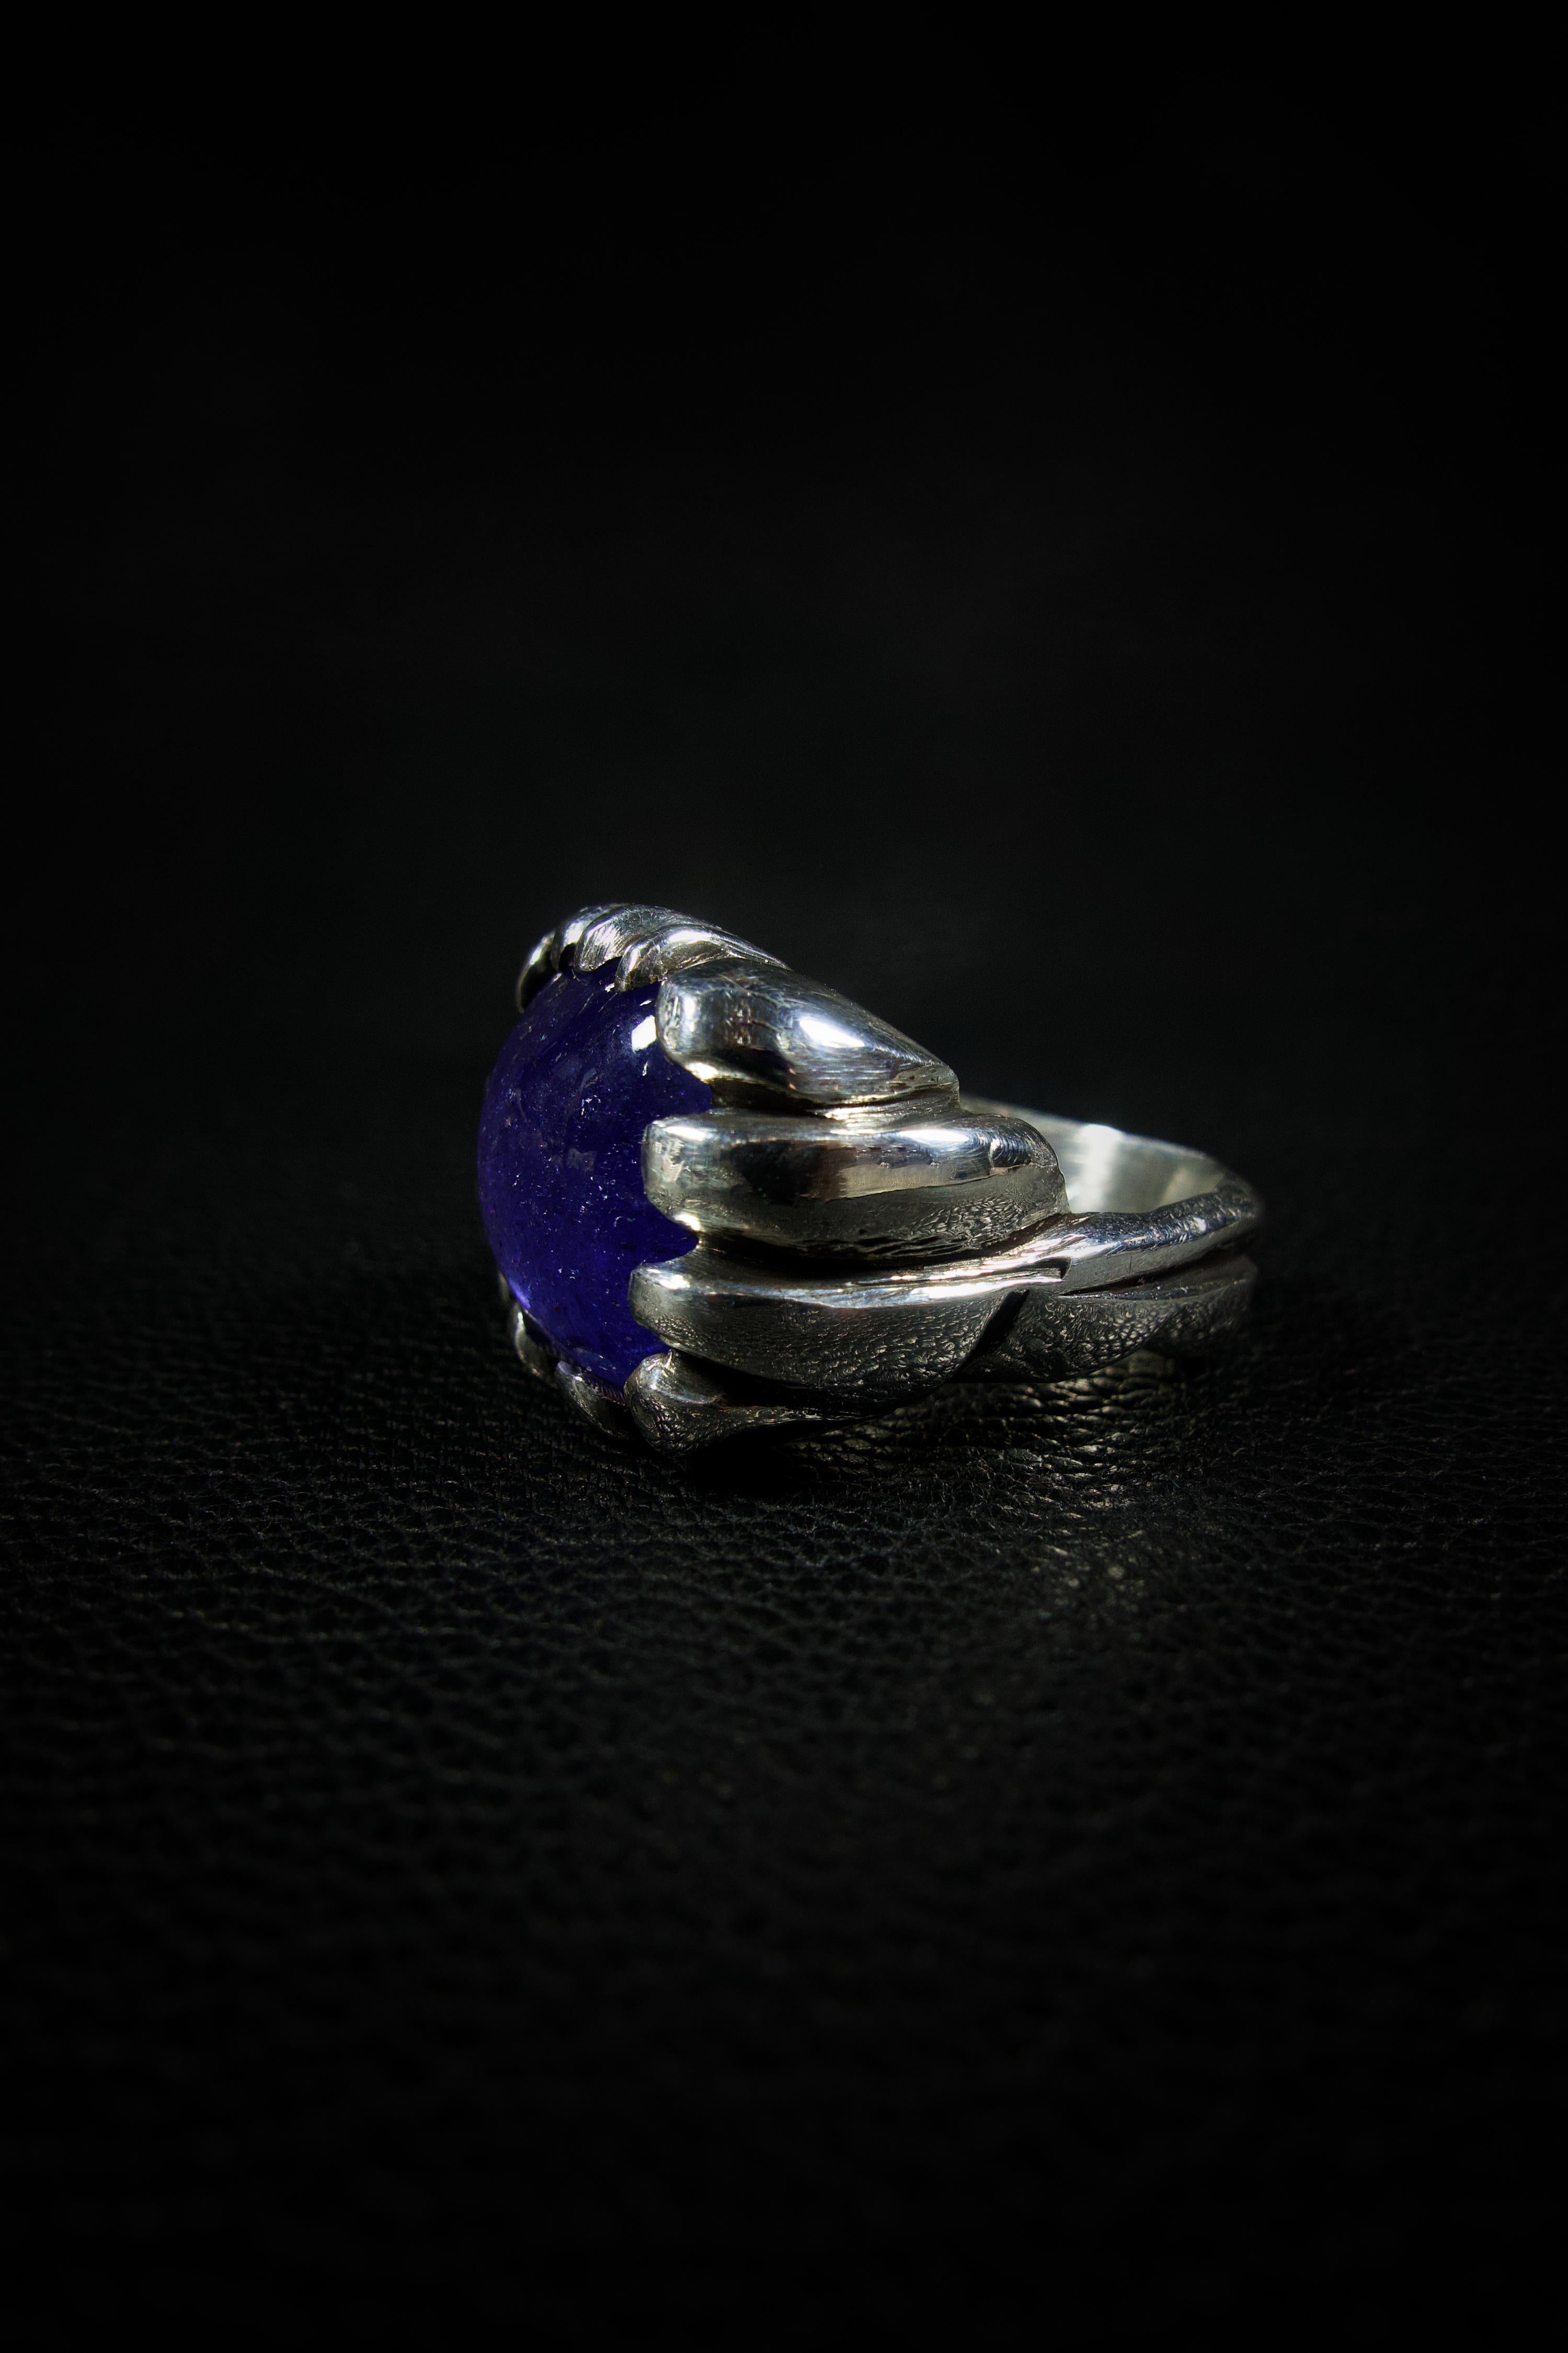 Cabochon  Rise (Tanzanite, Sterling Silver Ring) by Ken Fury